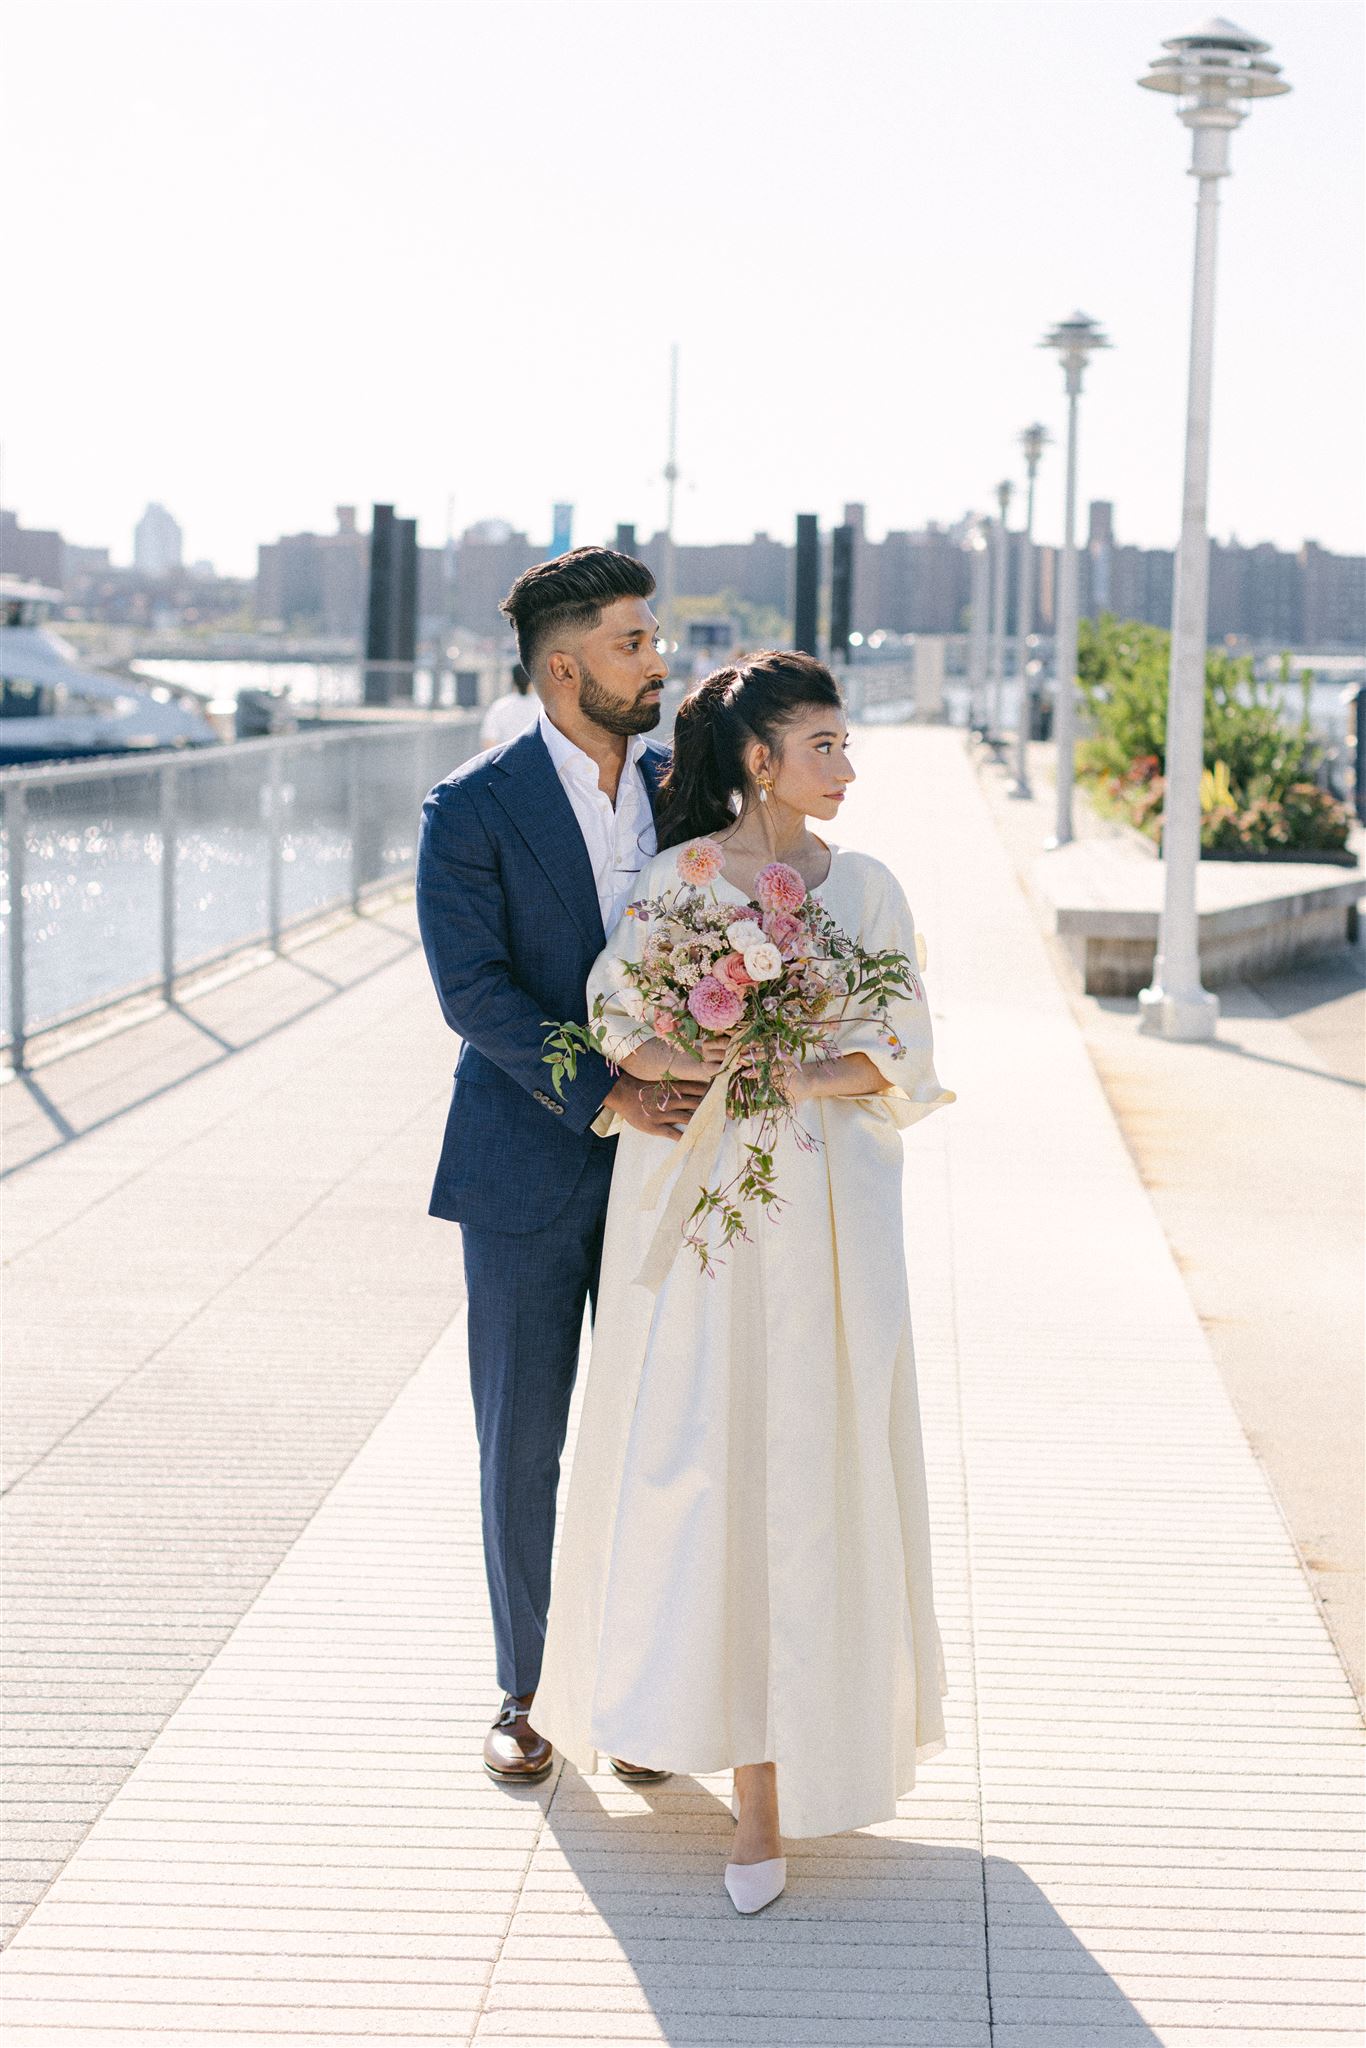 bride and groom wearing their wedding attire out by the river, the bride is holding a pink bouquet of flowers